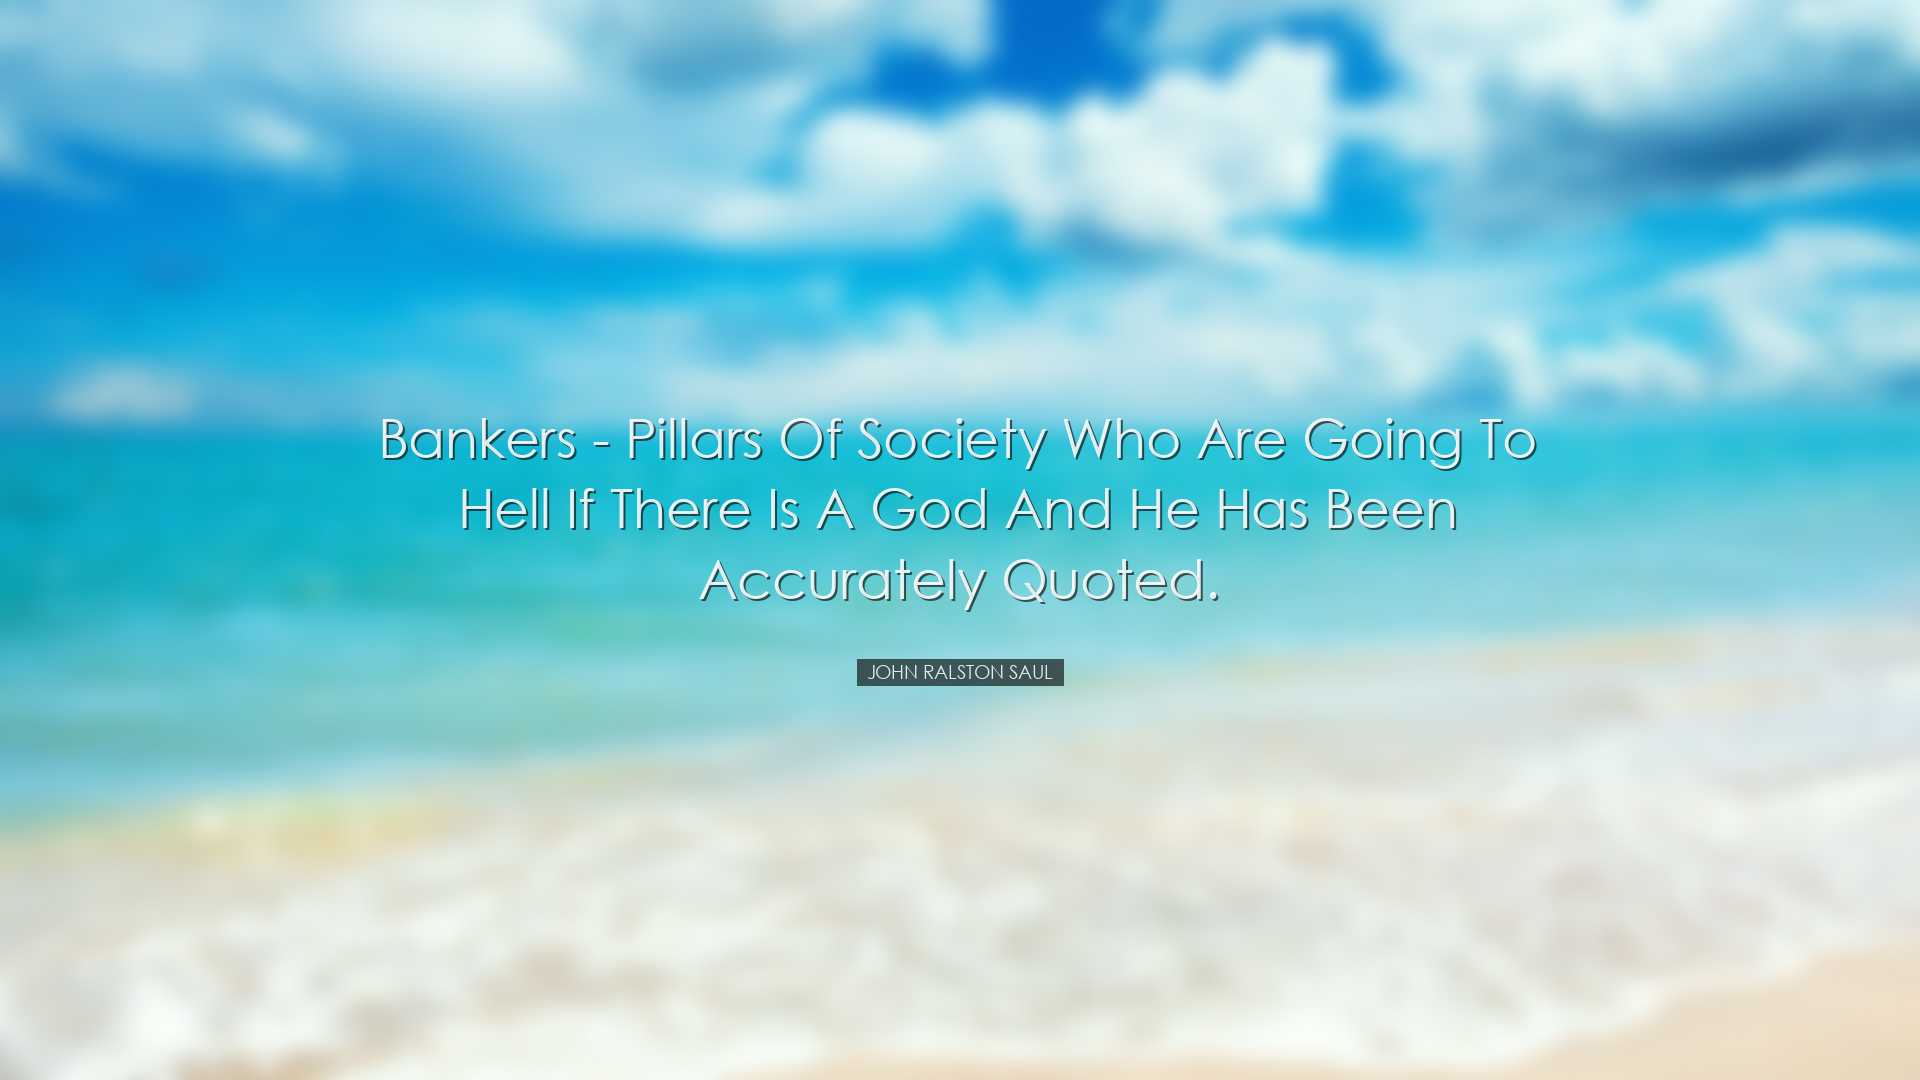 Bankers - pillars of society who are going to hell if there is a G